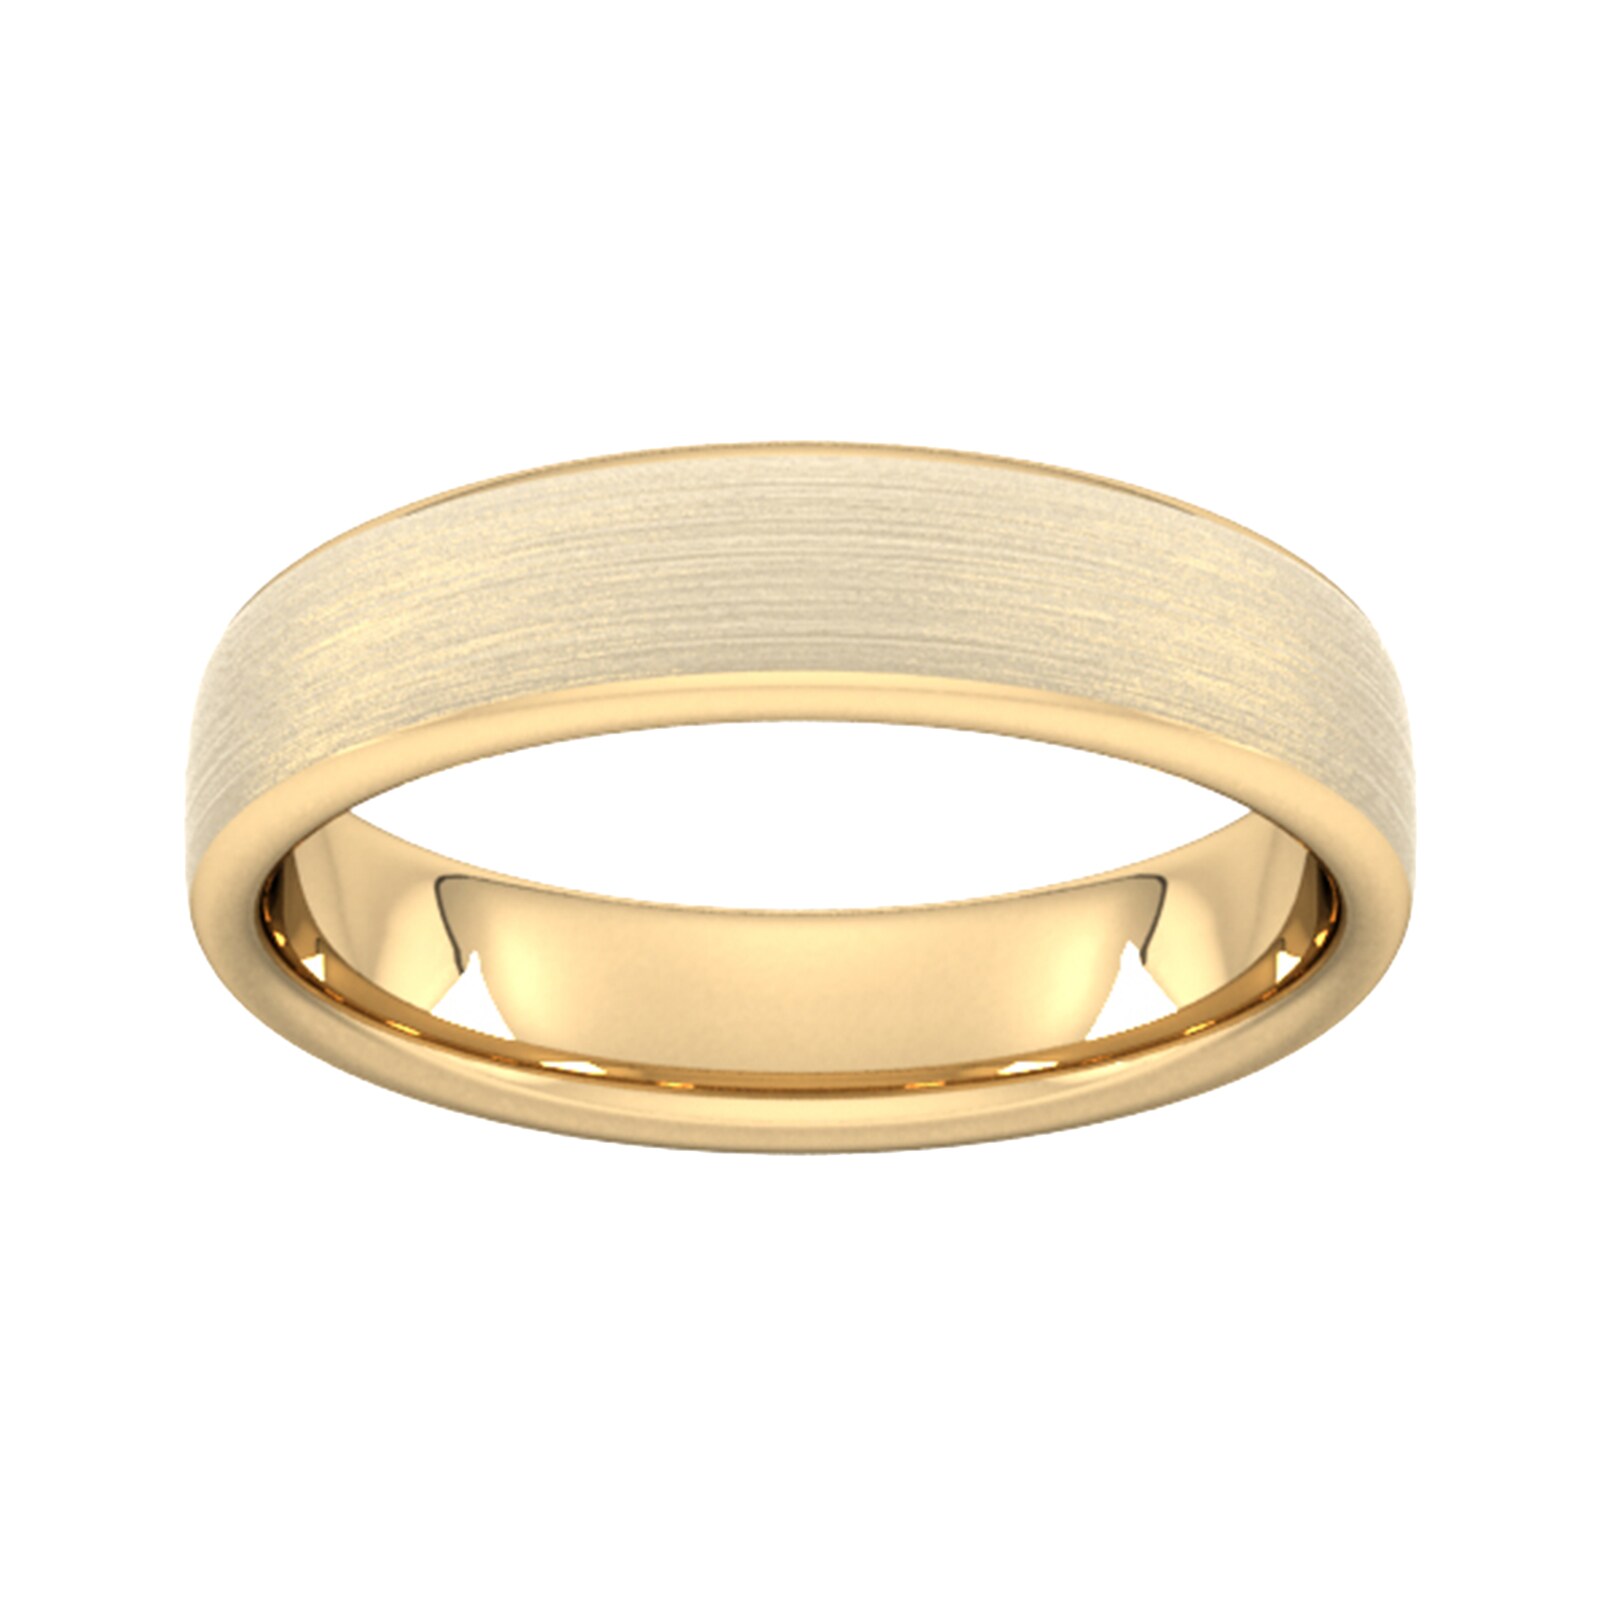 5mm Traditional Court Heavy Matt Finished Wedding Ring In 9 Carat Yellow Gold - Ring Size U